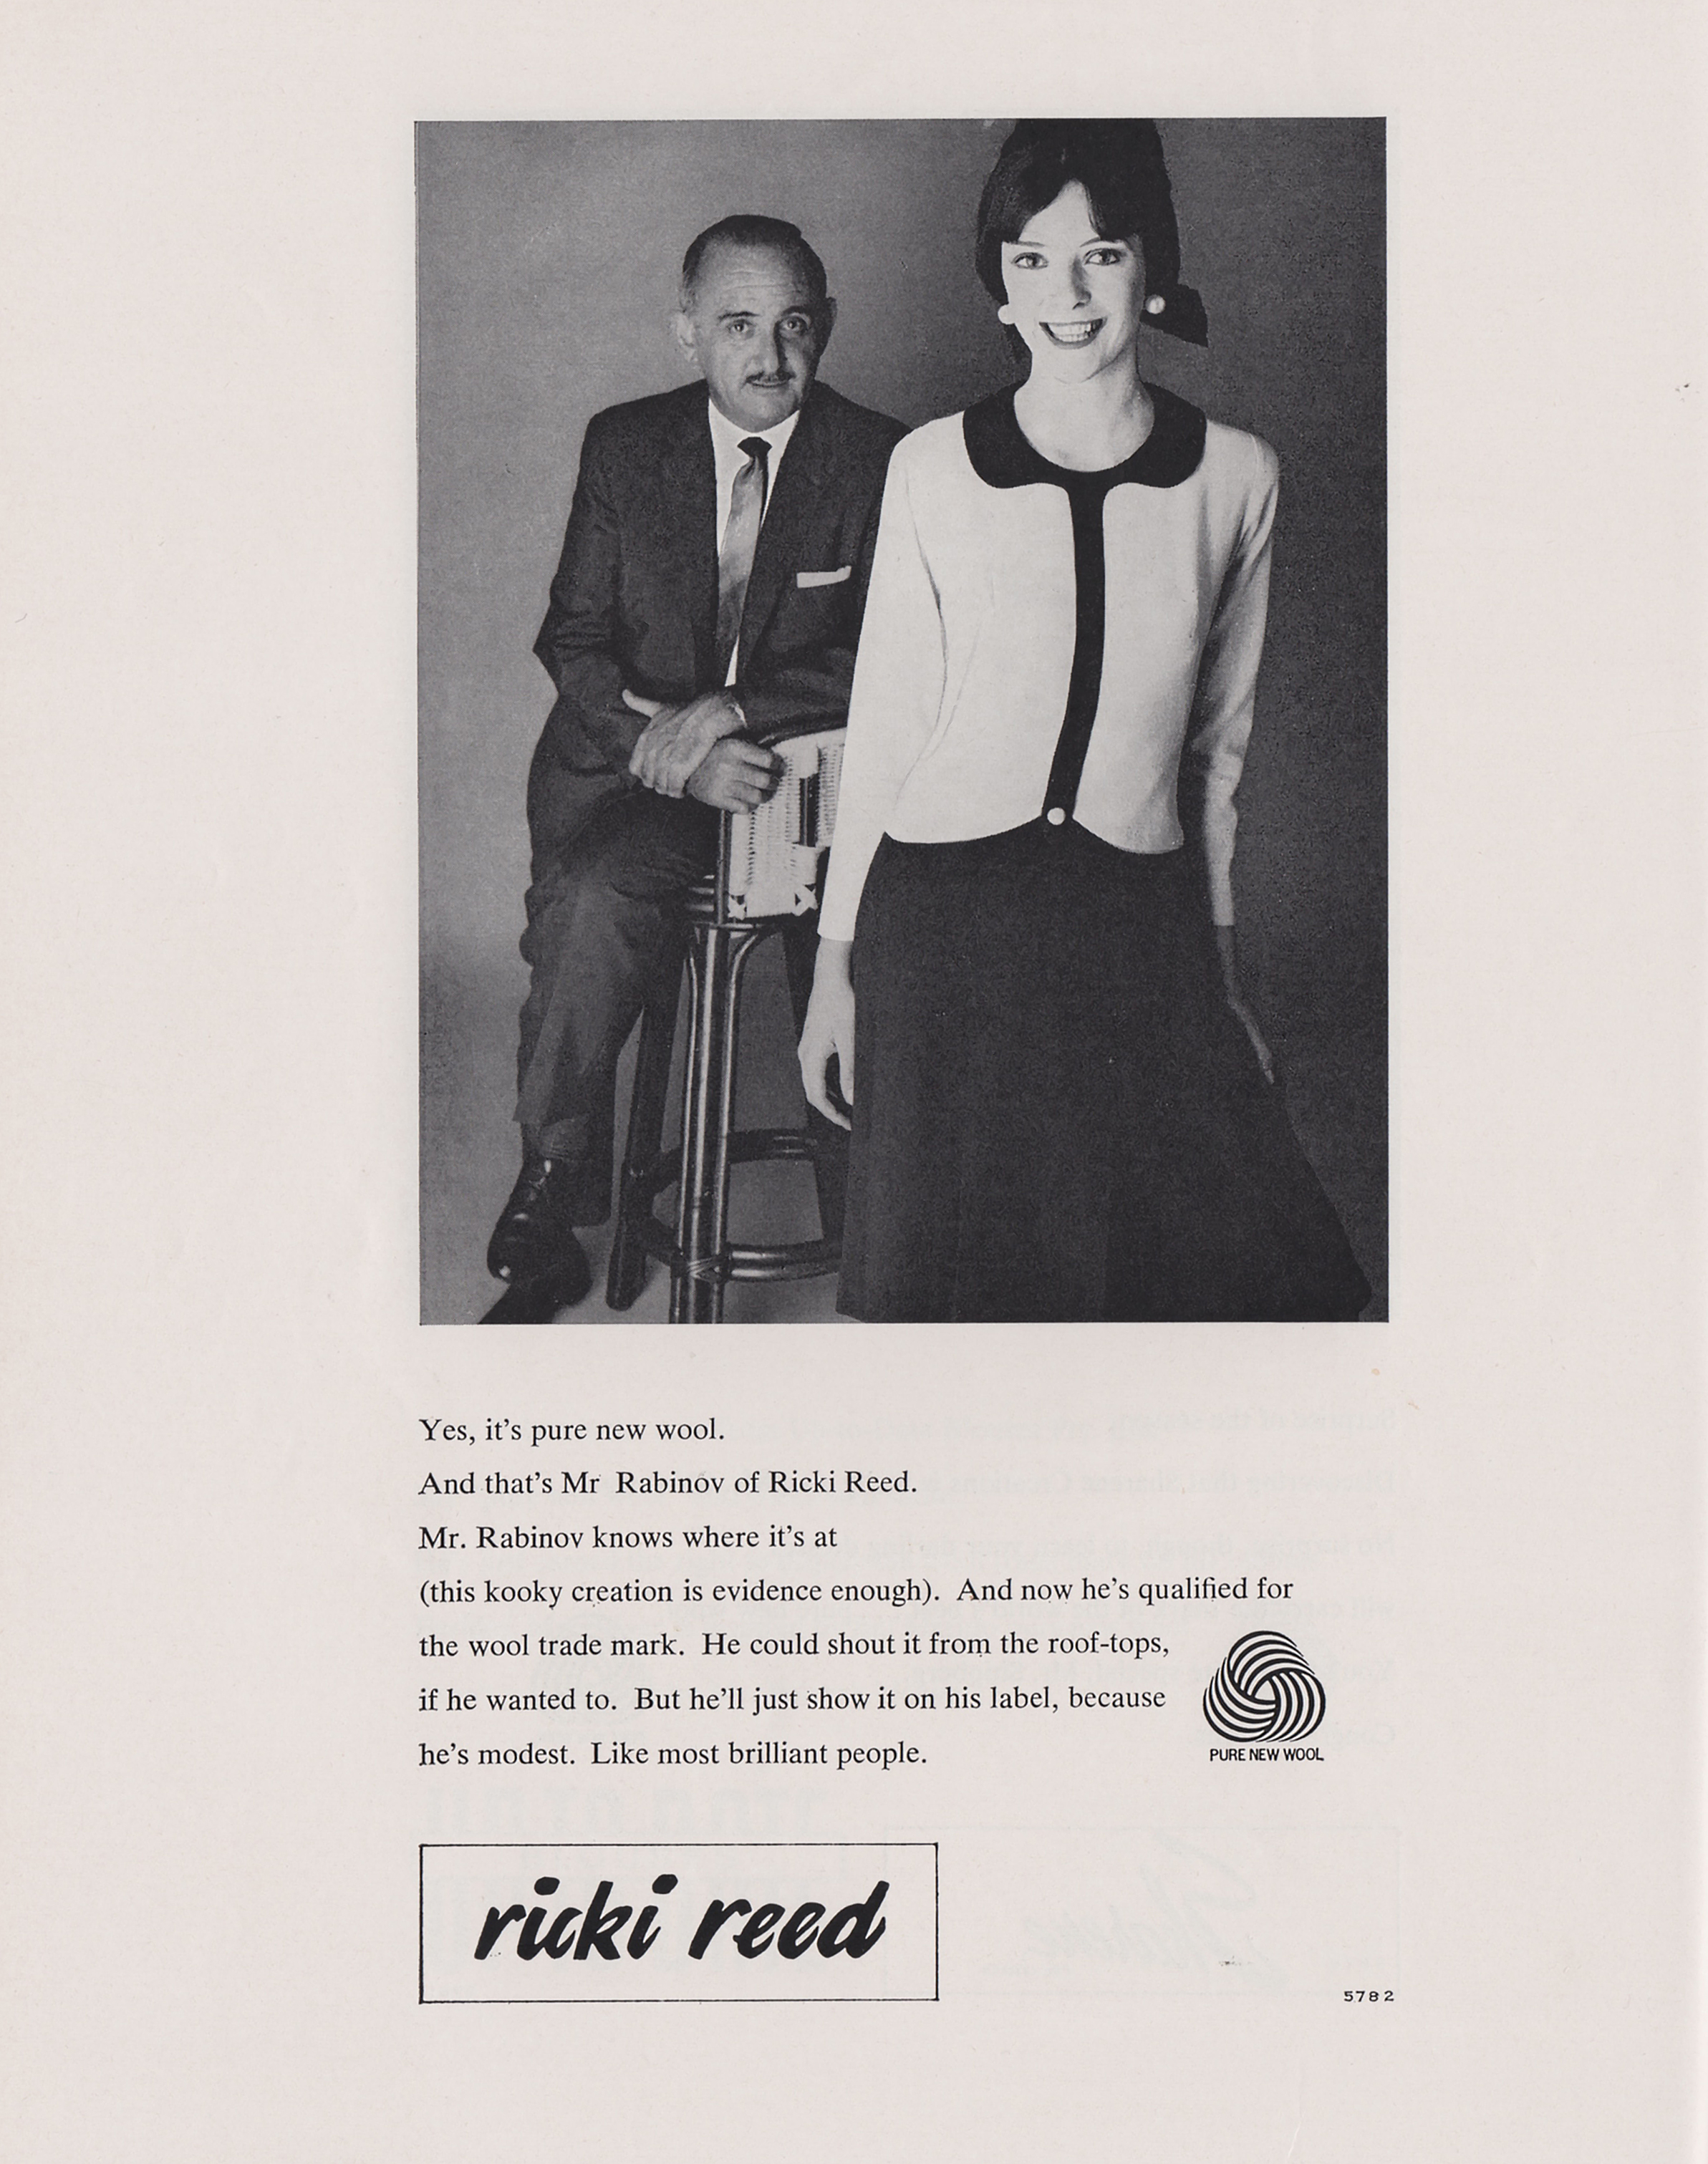 A one page ad for Ricki Reed with a photo of Alan Rabinov and a model